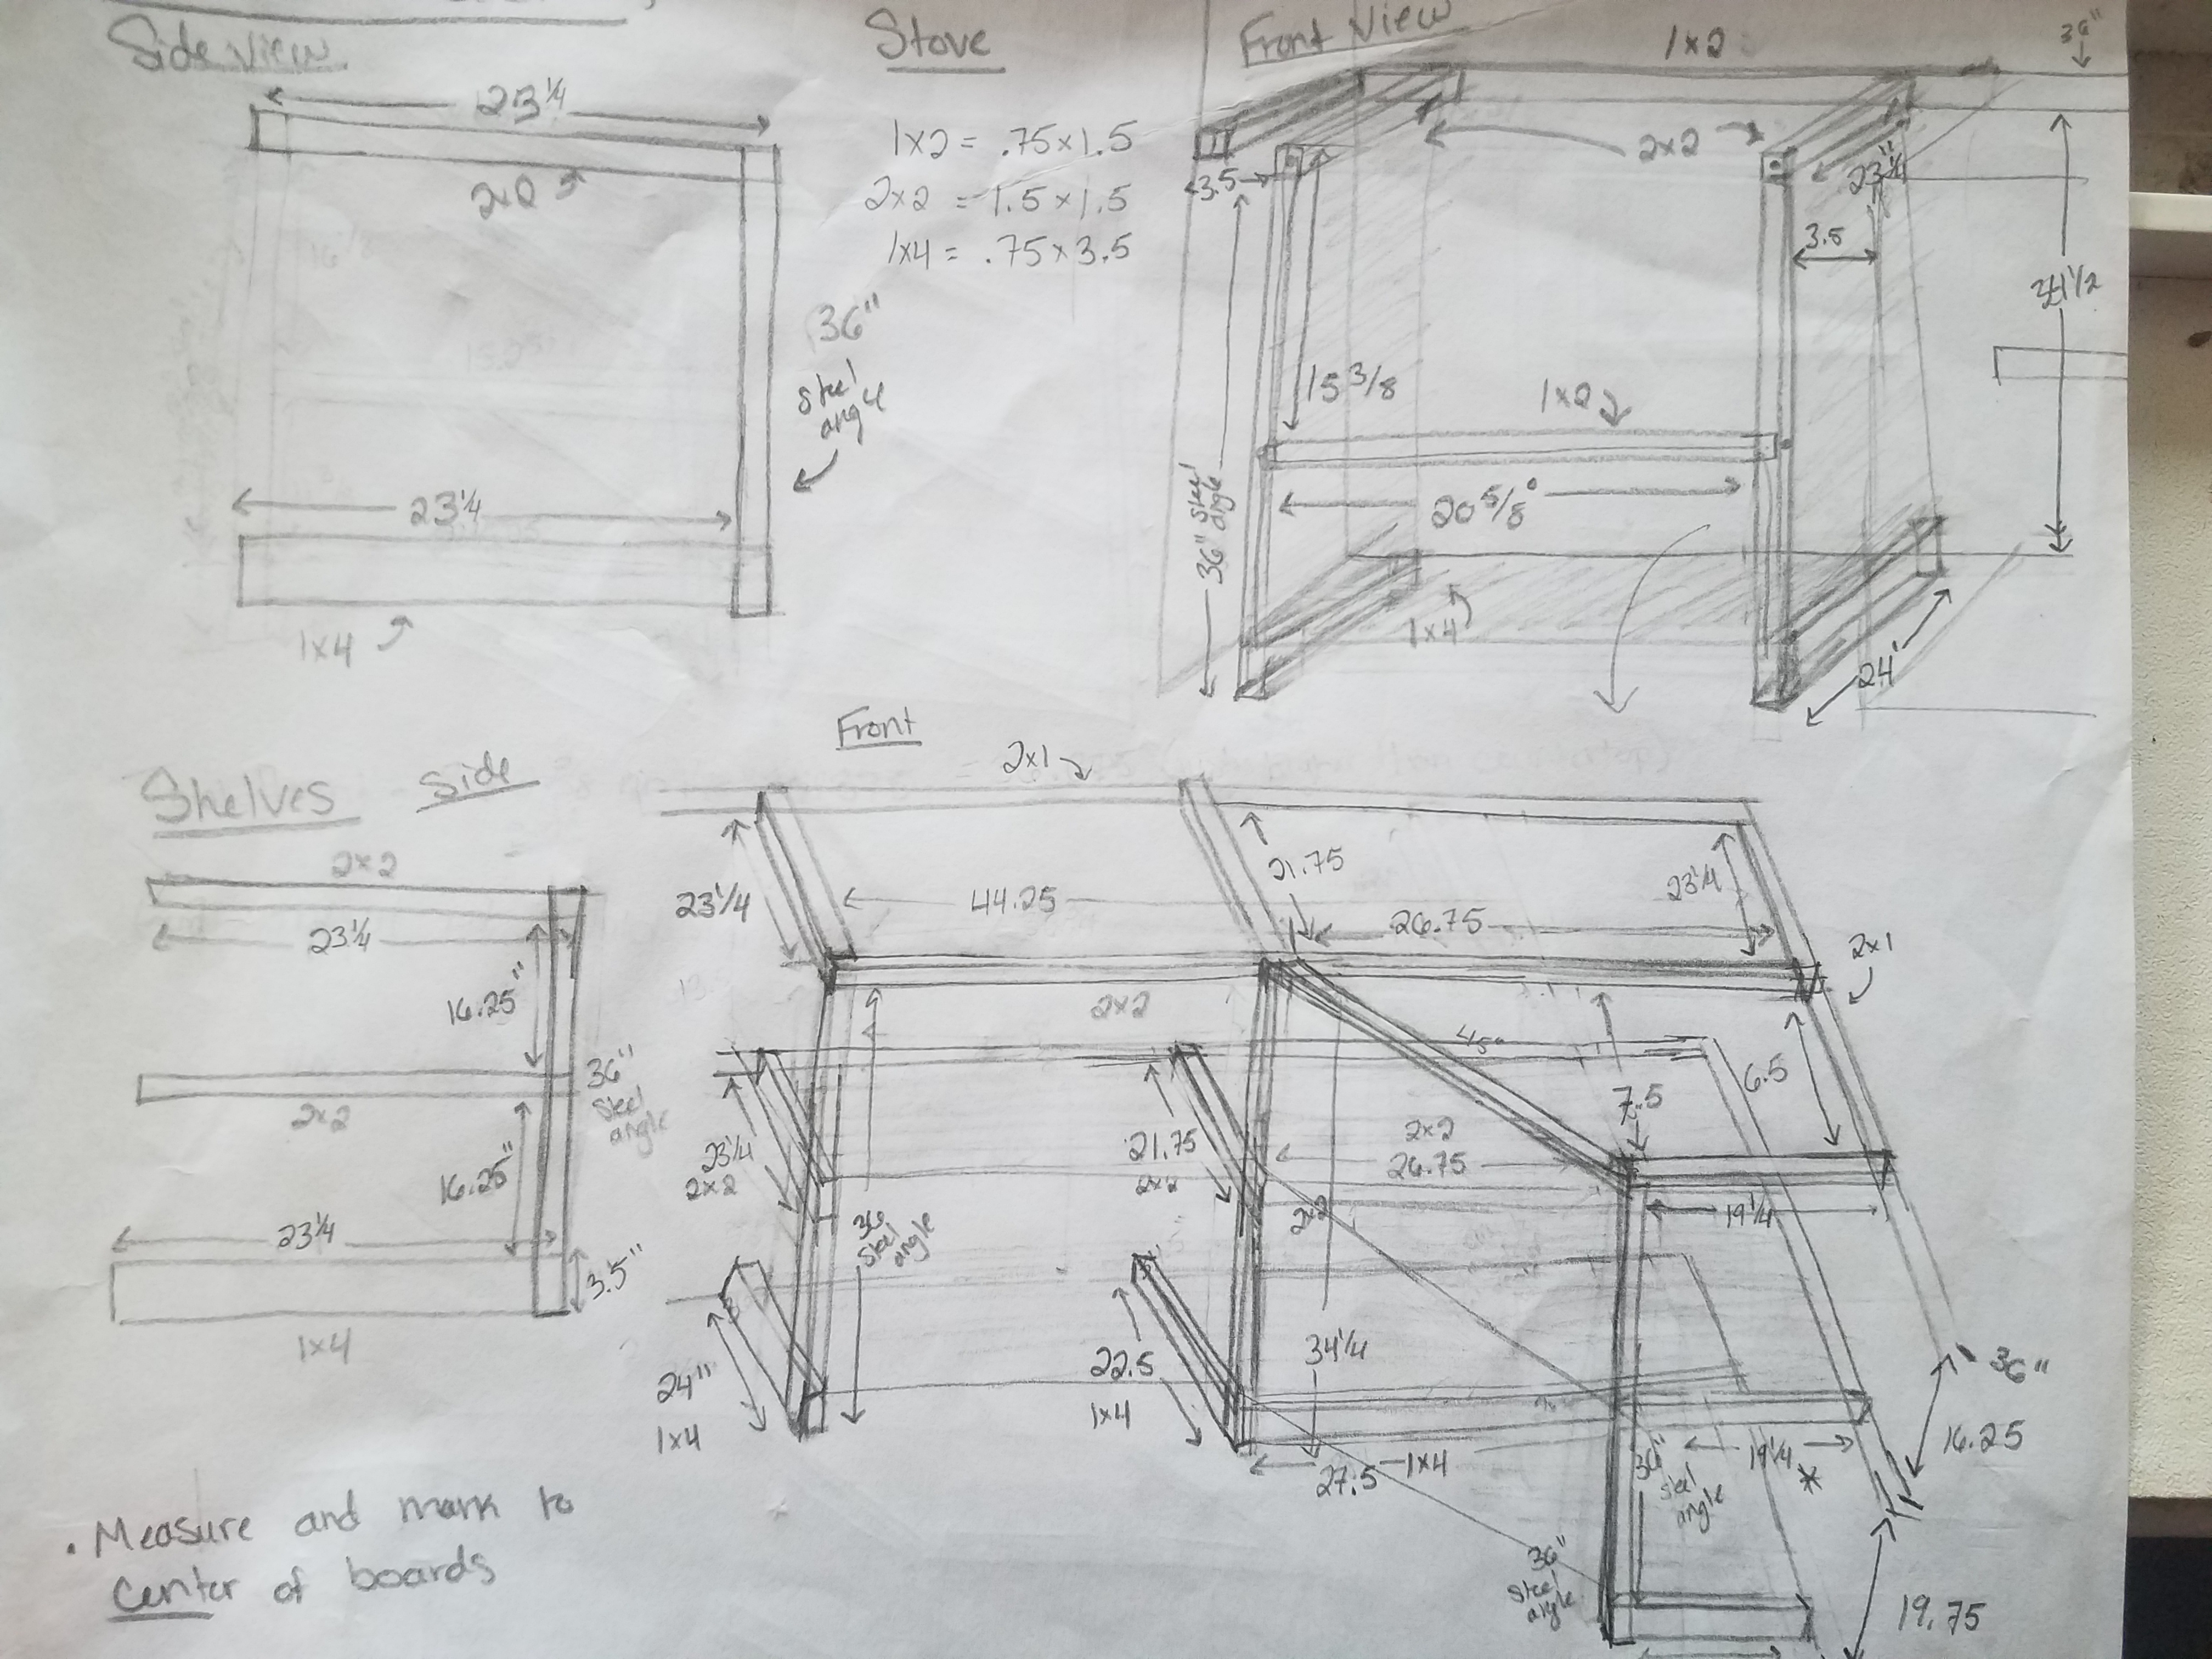 Schematic plans for kitchen shelving and countertop